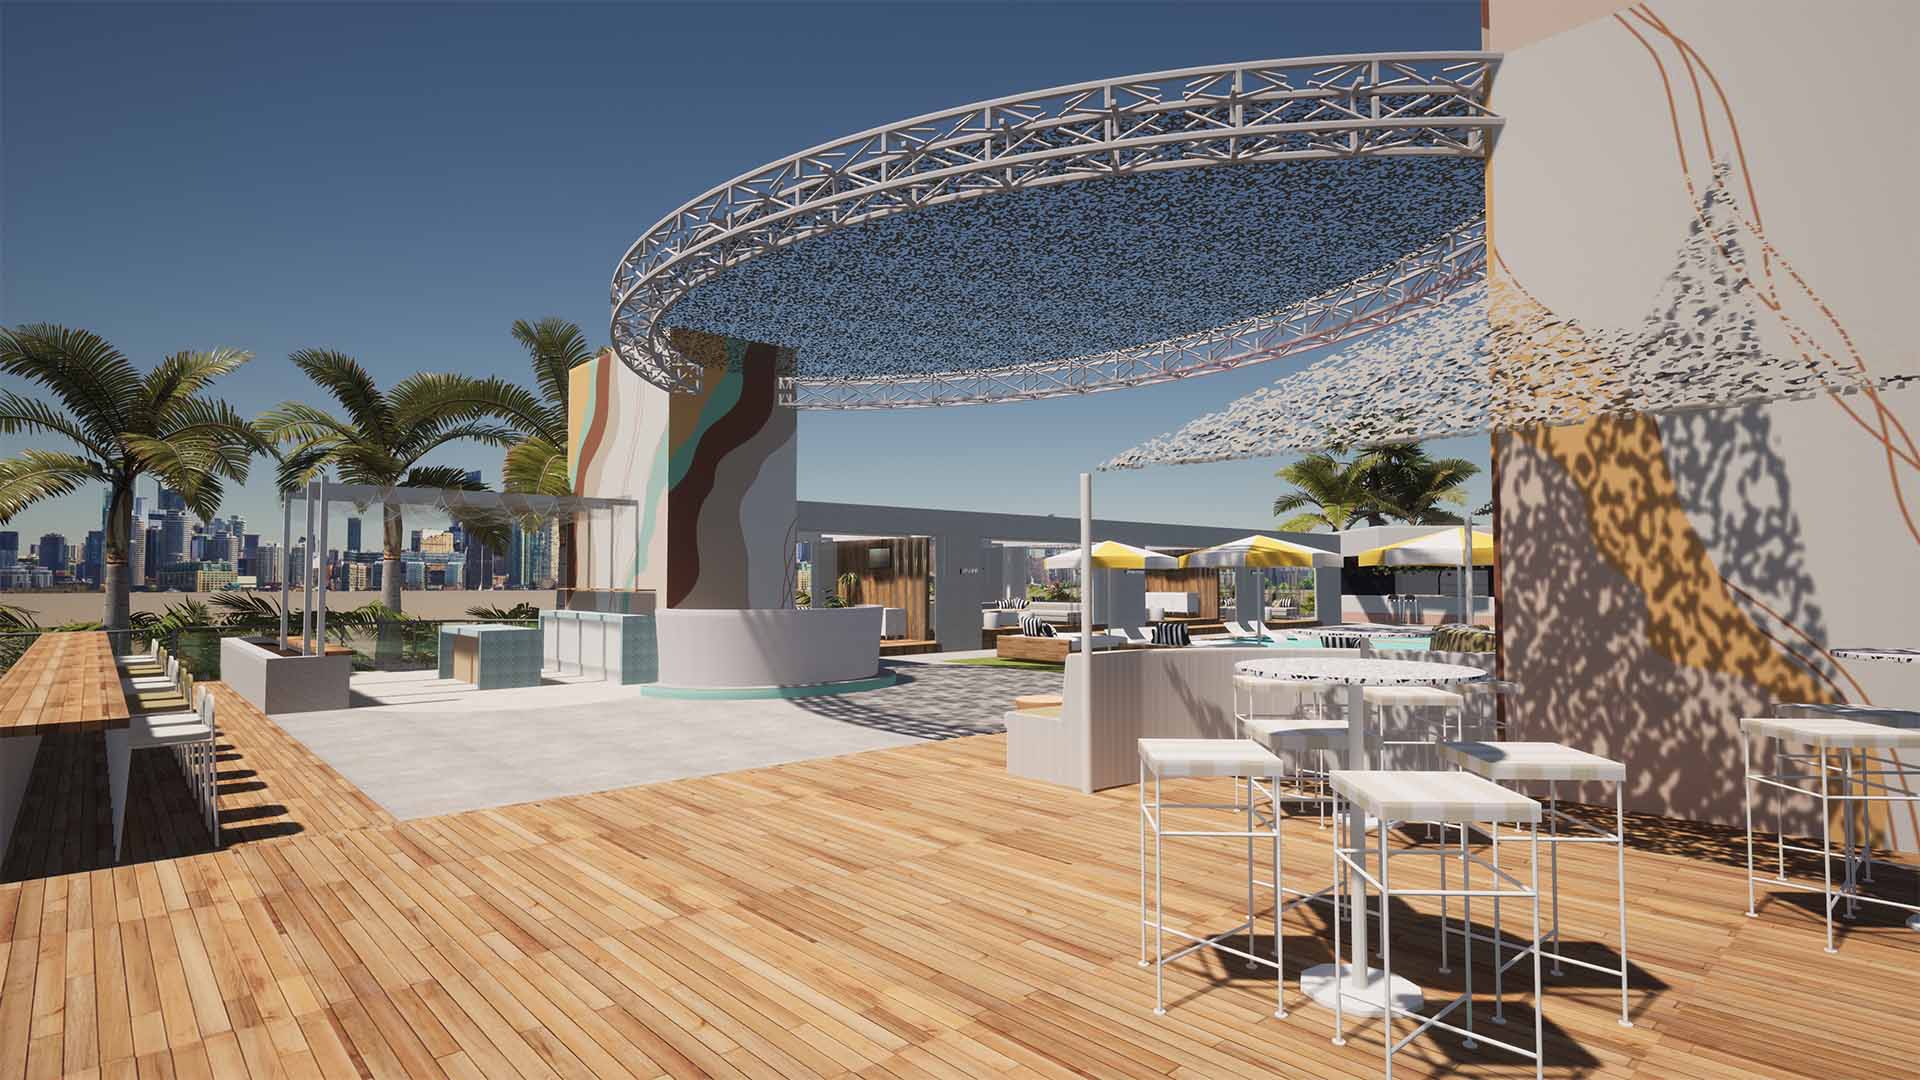 Cali Beach Club's Cabana-Filled Oceanside Precinct Will Open on a Gold Coast Rooftop in August